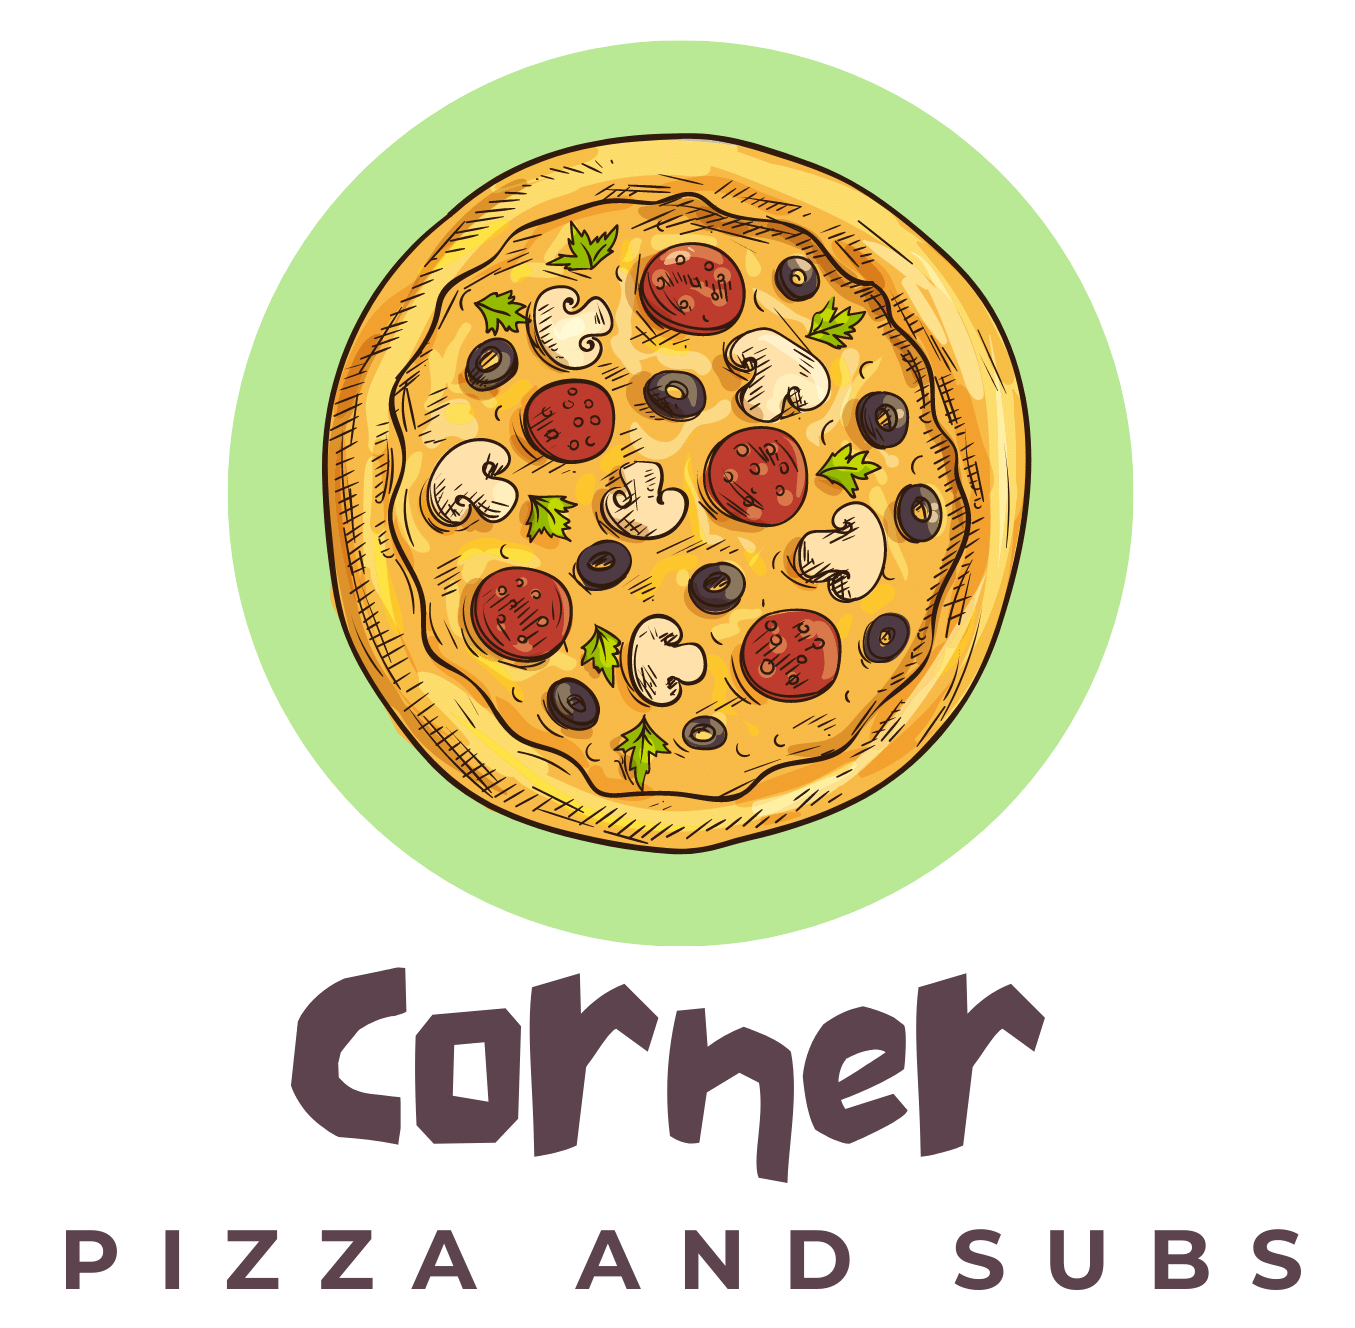 Corner Pizza and Subs Home